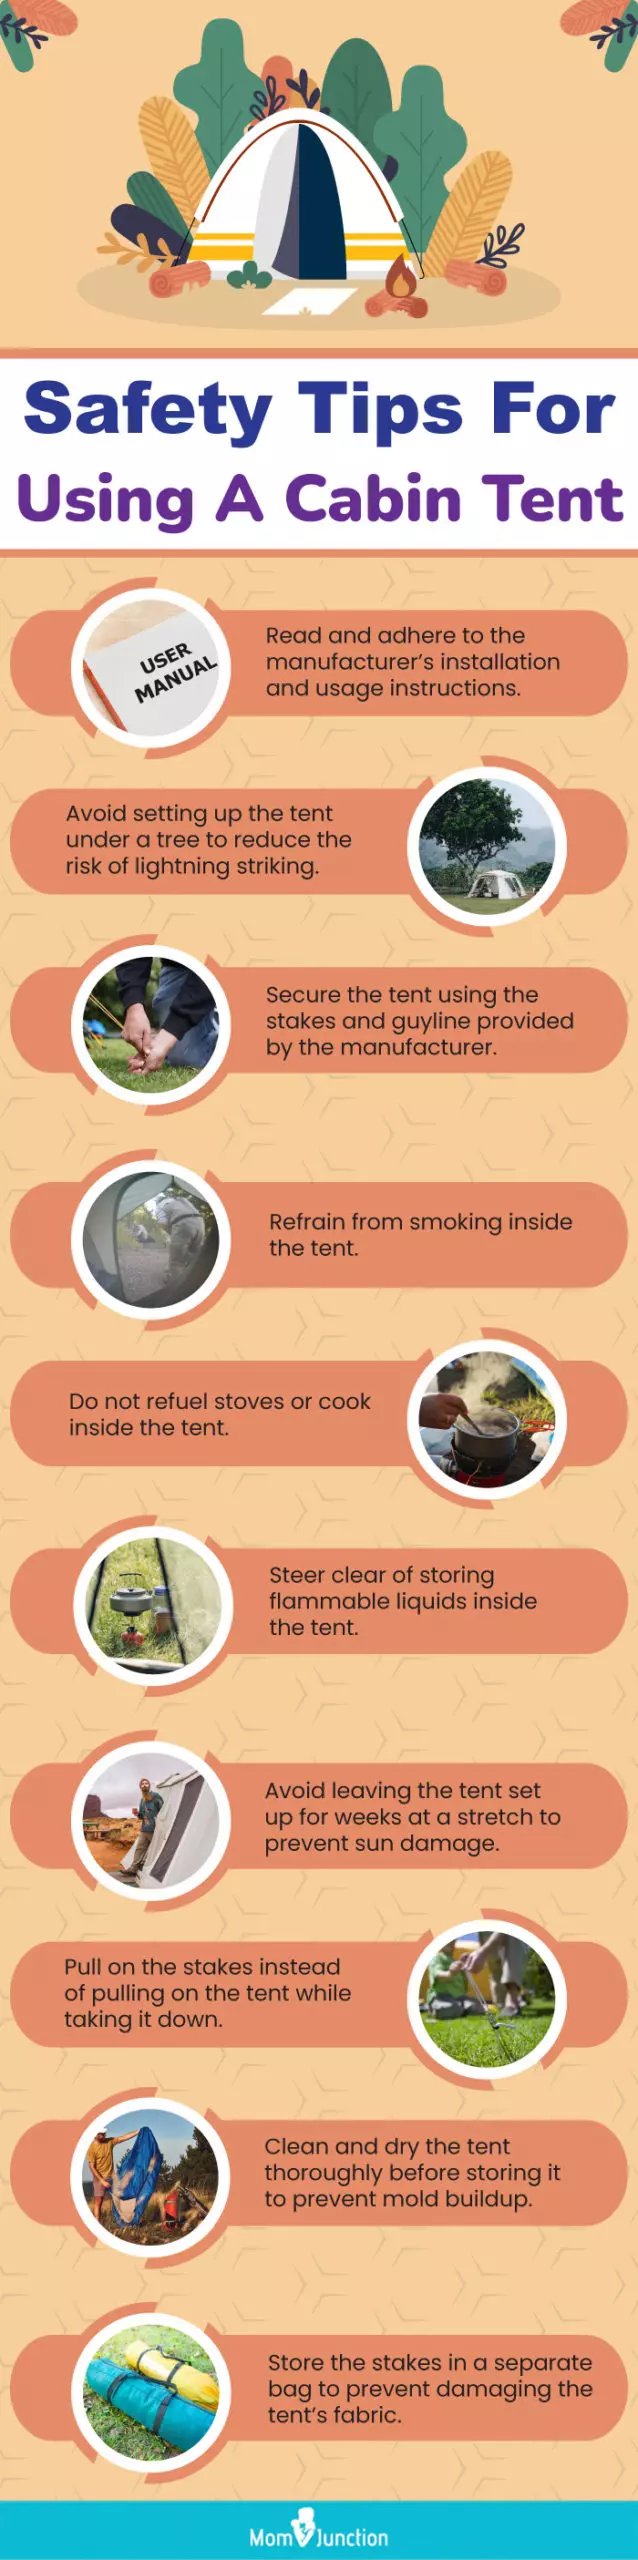 Safety Tips For Using A Cabin Tent (infographic)